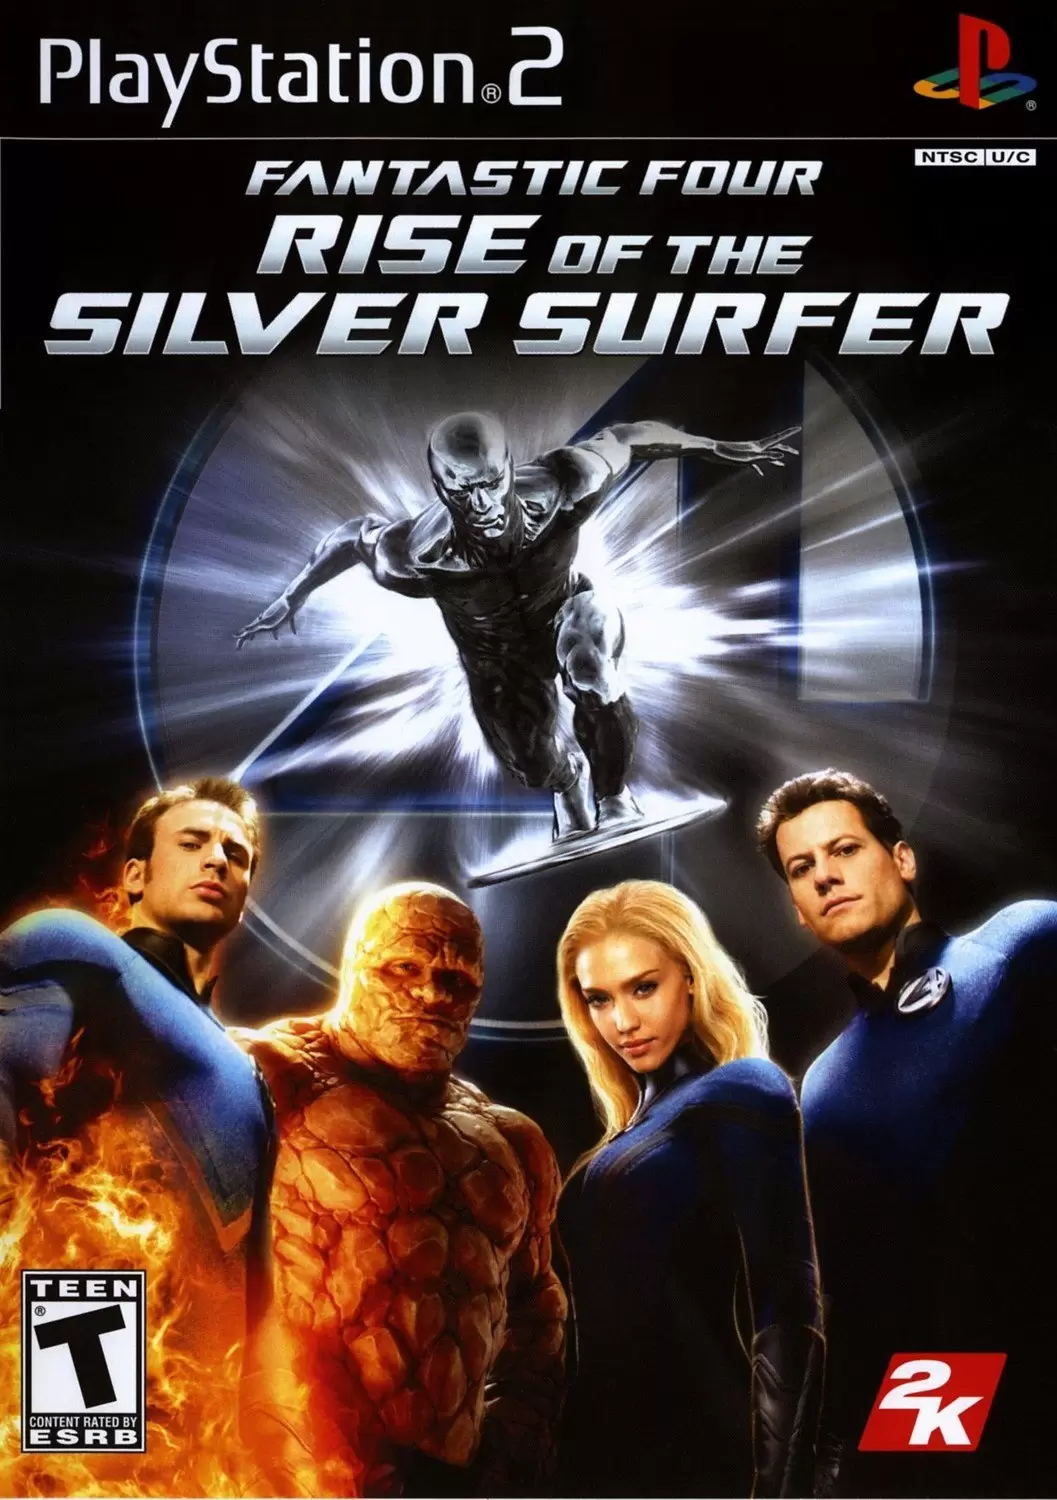 PS2 Games - Fantastic Four: Rise of the Silver Surfer